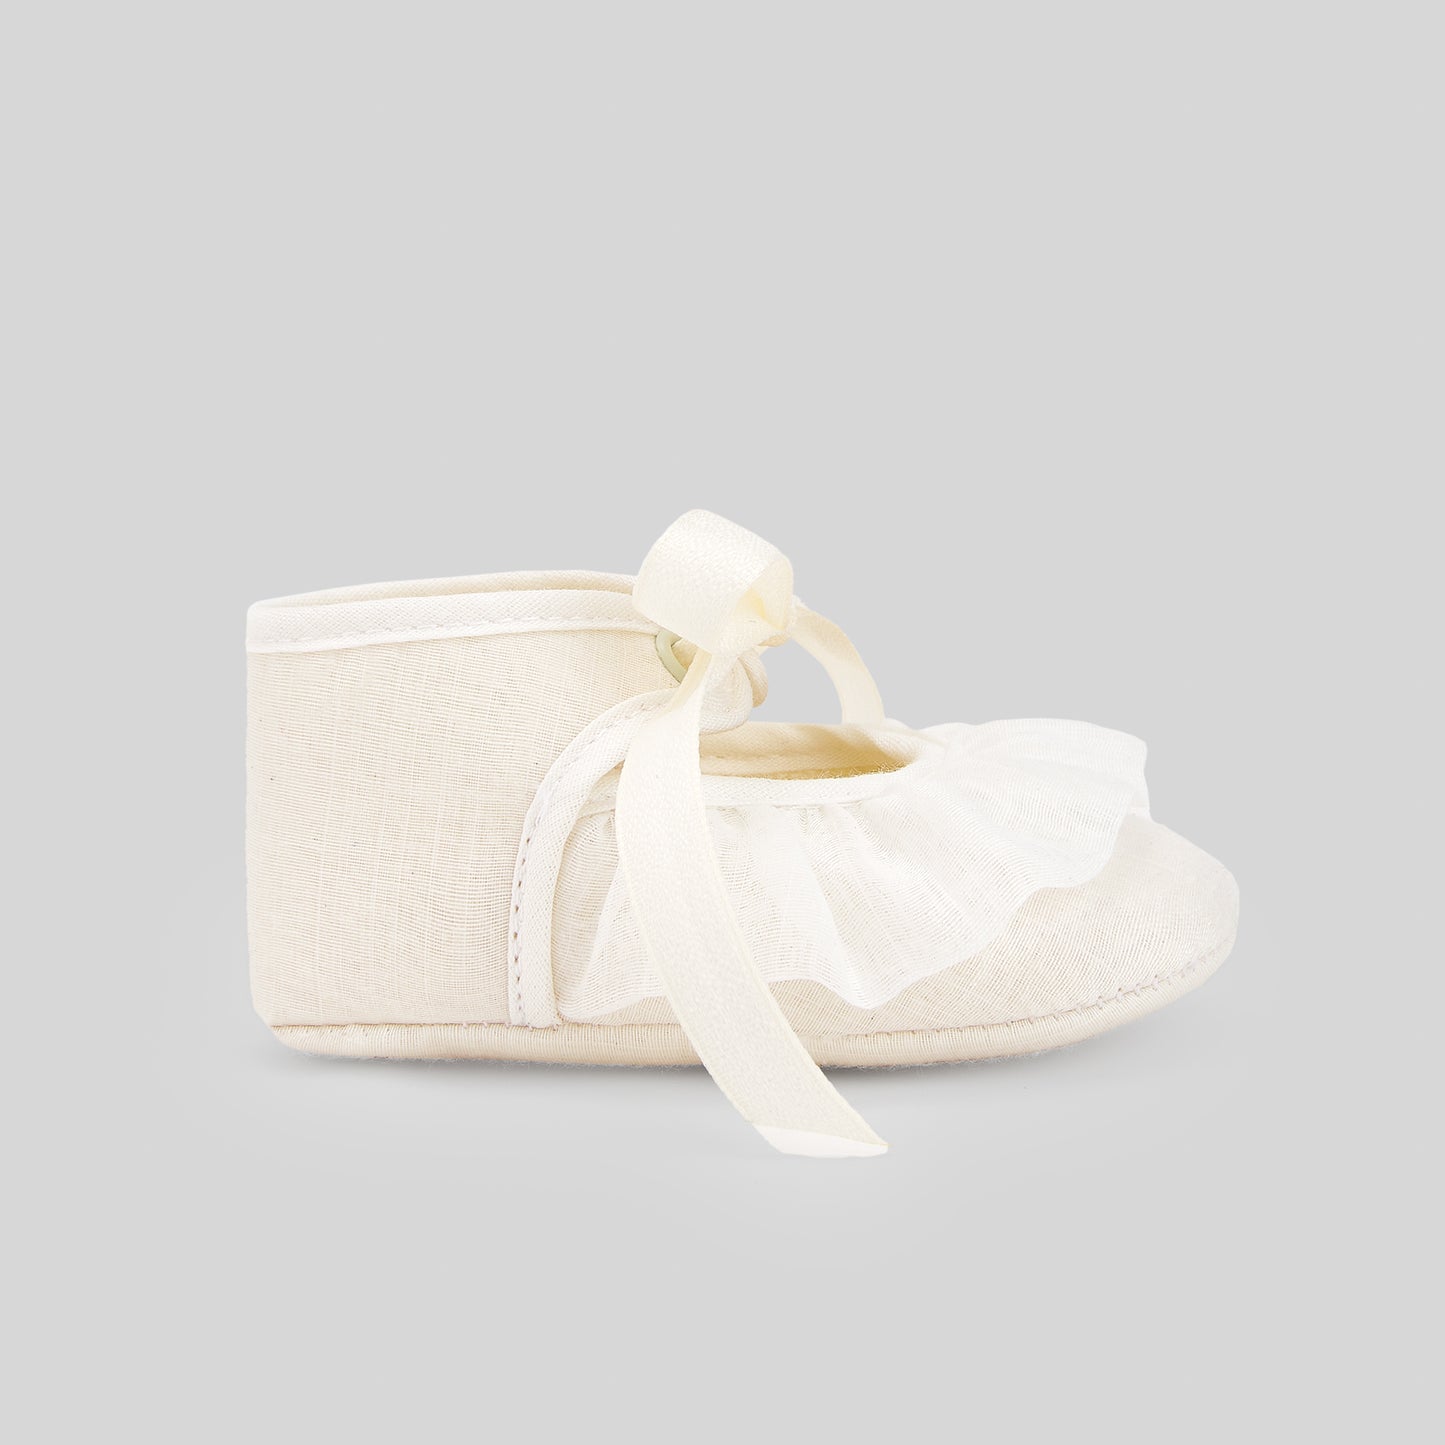 PAZ RODRIGUEZ Ivory Ceremony Shoe with Organza Bow